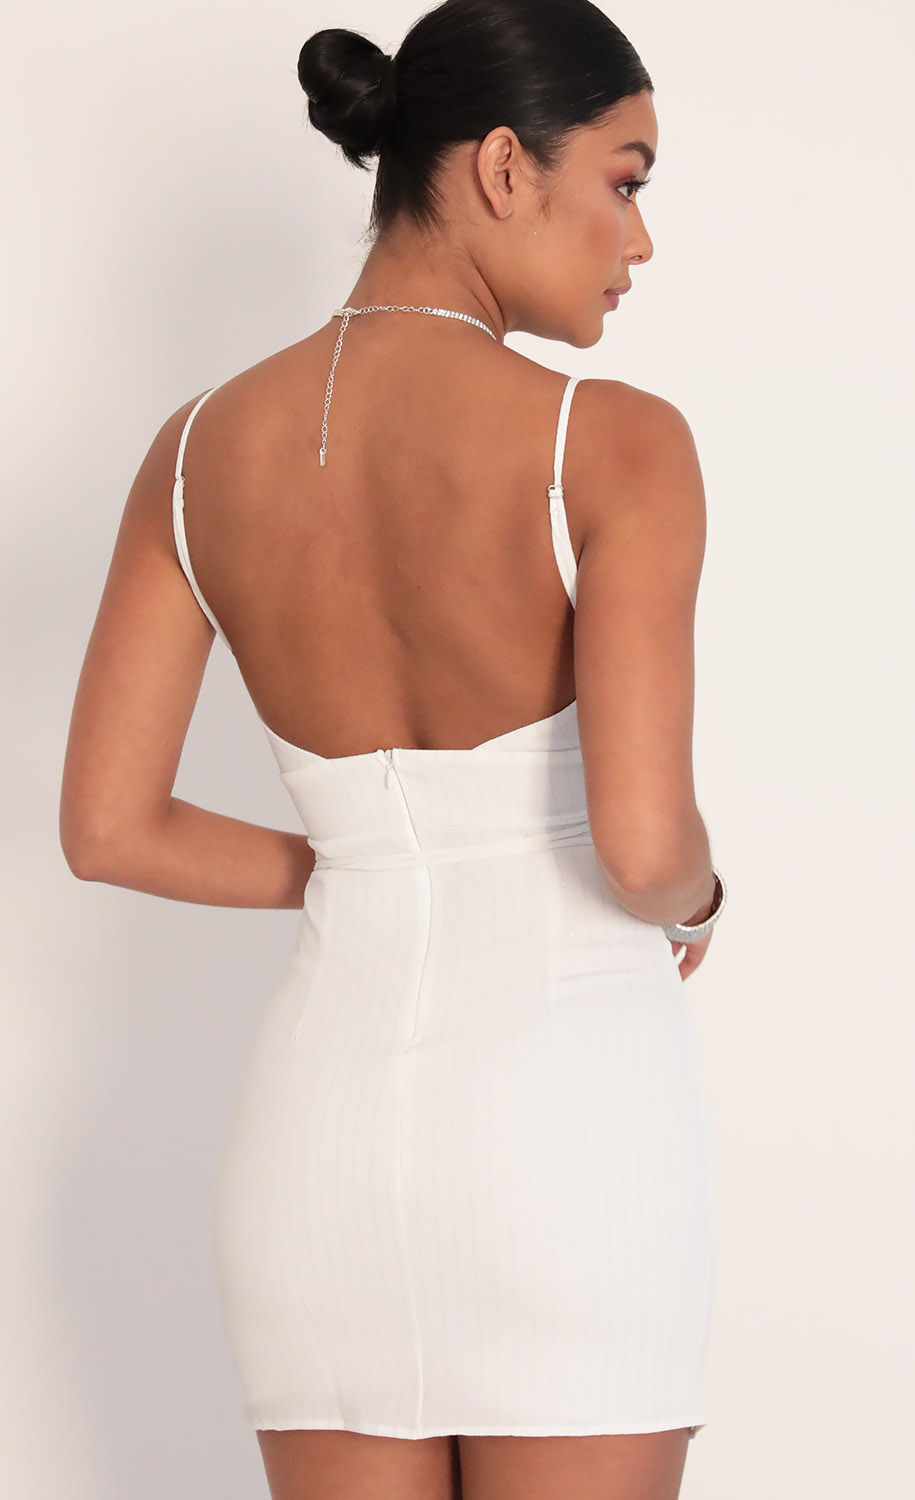 Party dresses > Colette Crossed Hearts Dress in White